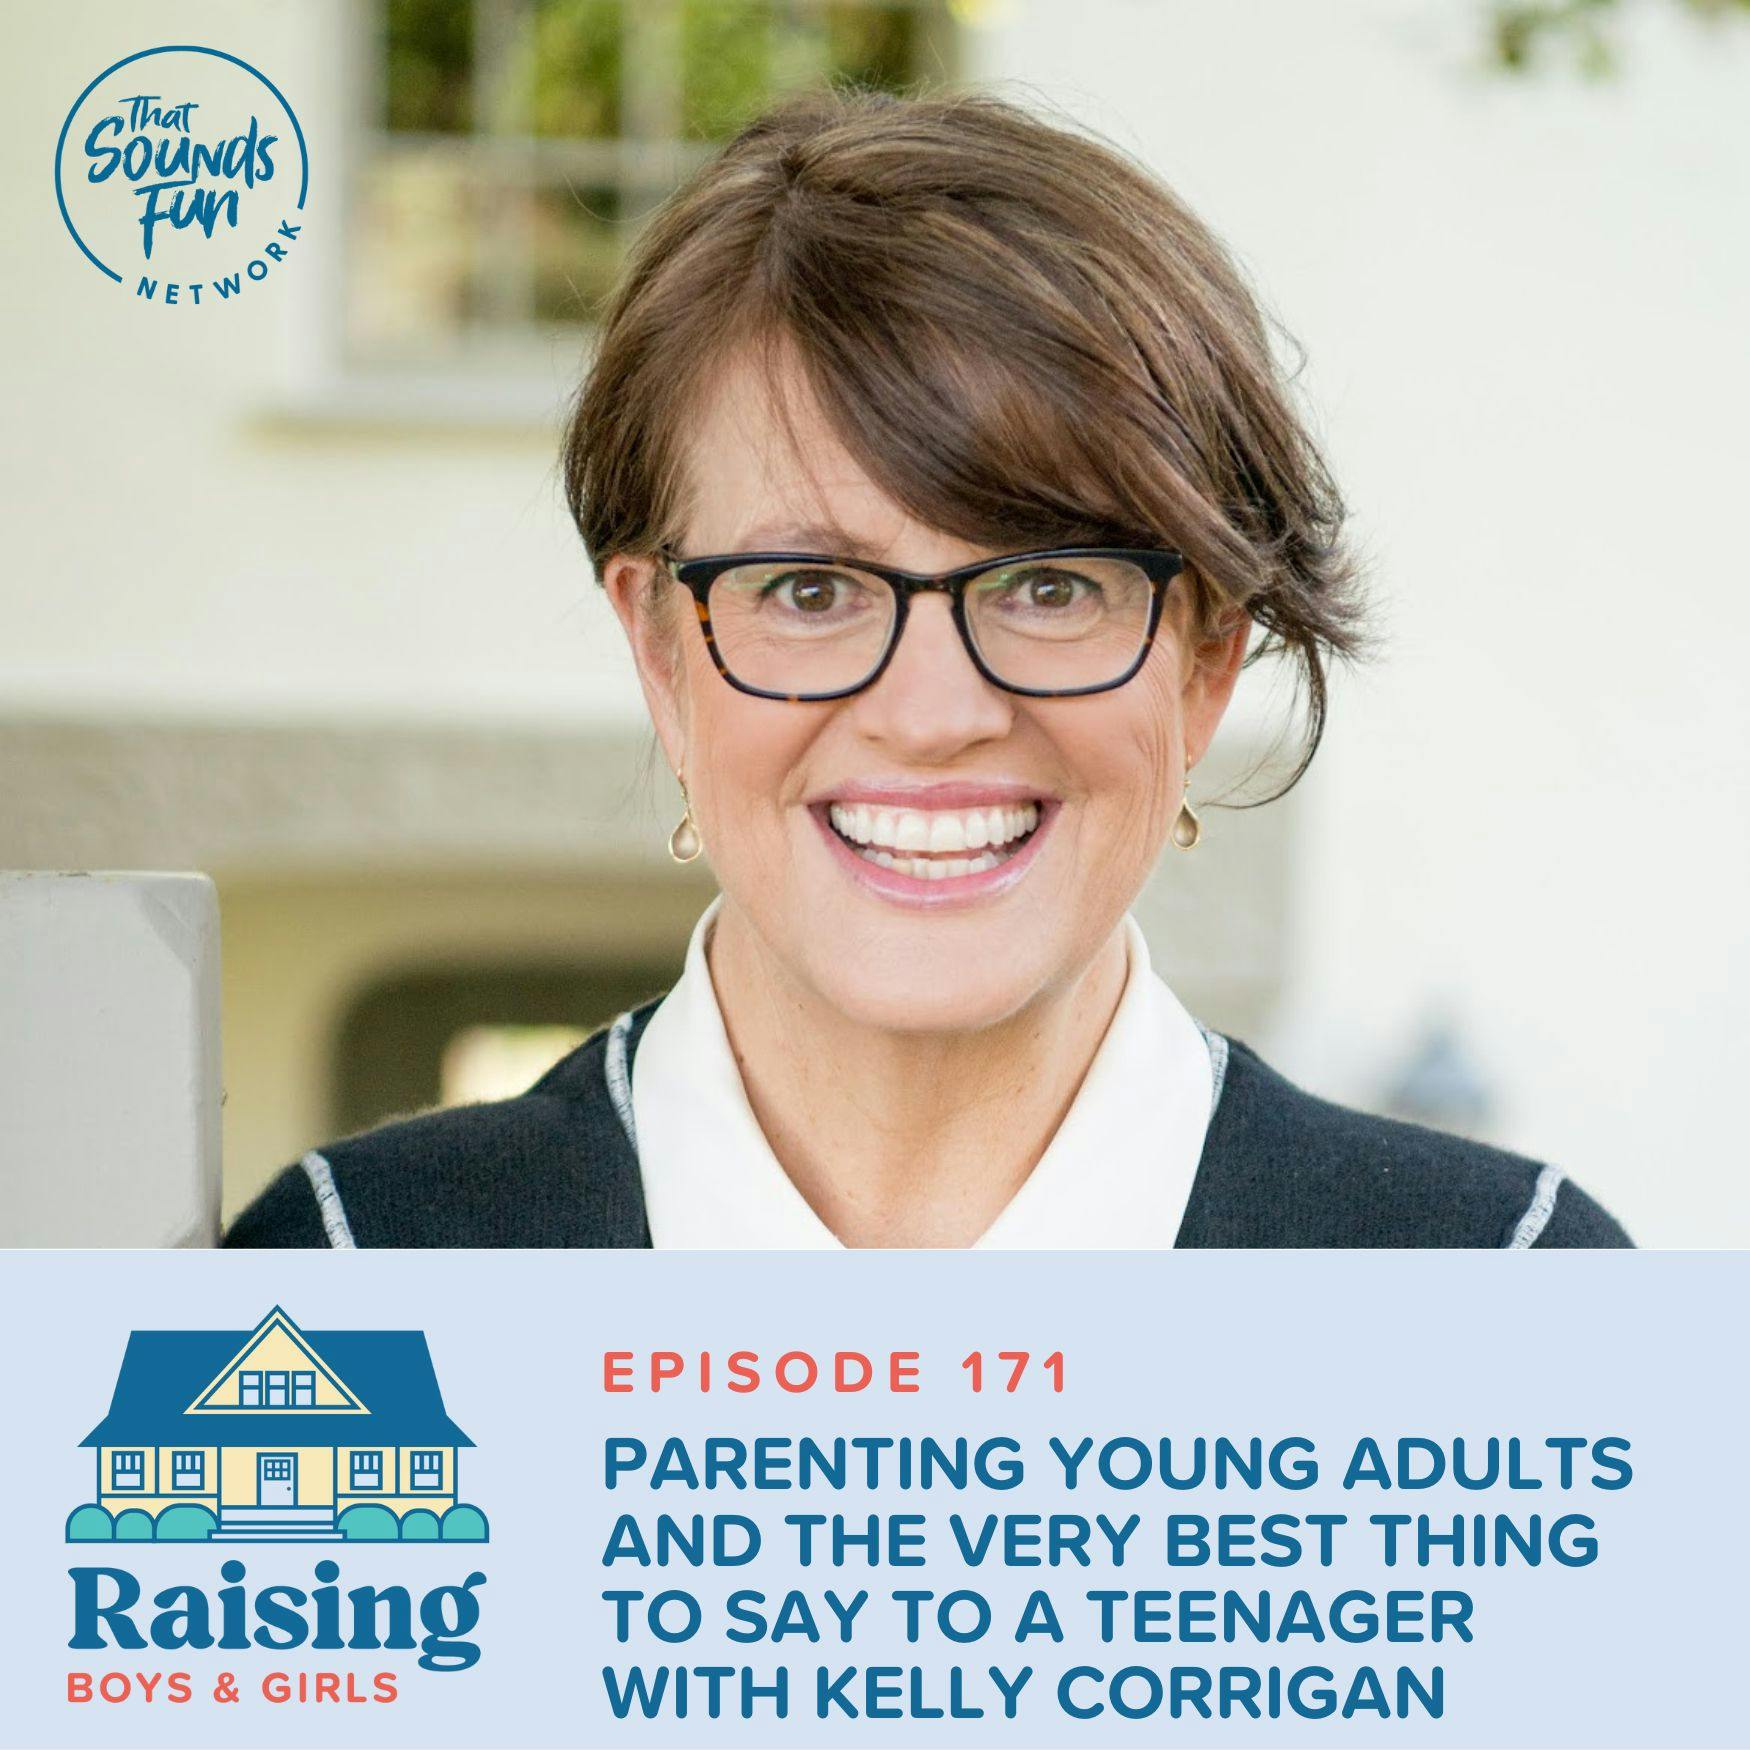 Episode 171: Parenting Young Adults and the Very Best Thing to Say to a Teenager with Kelly Corrigan